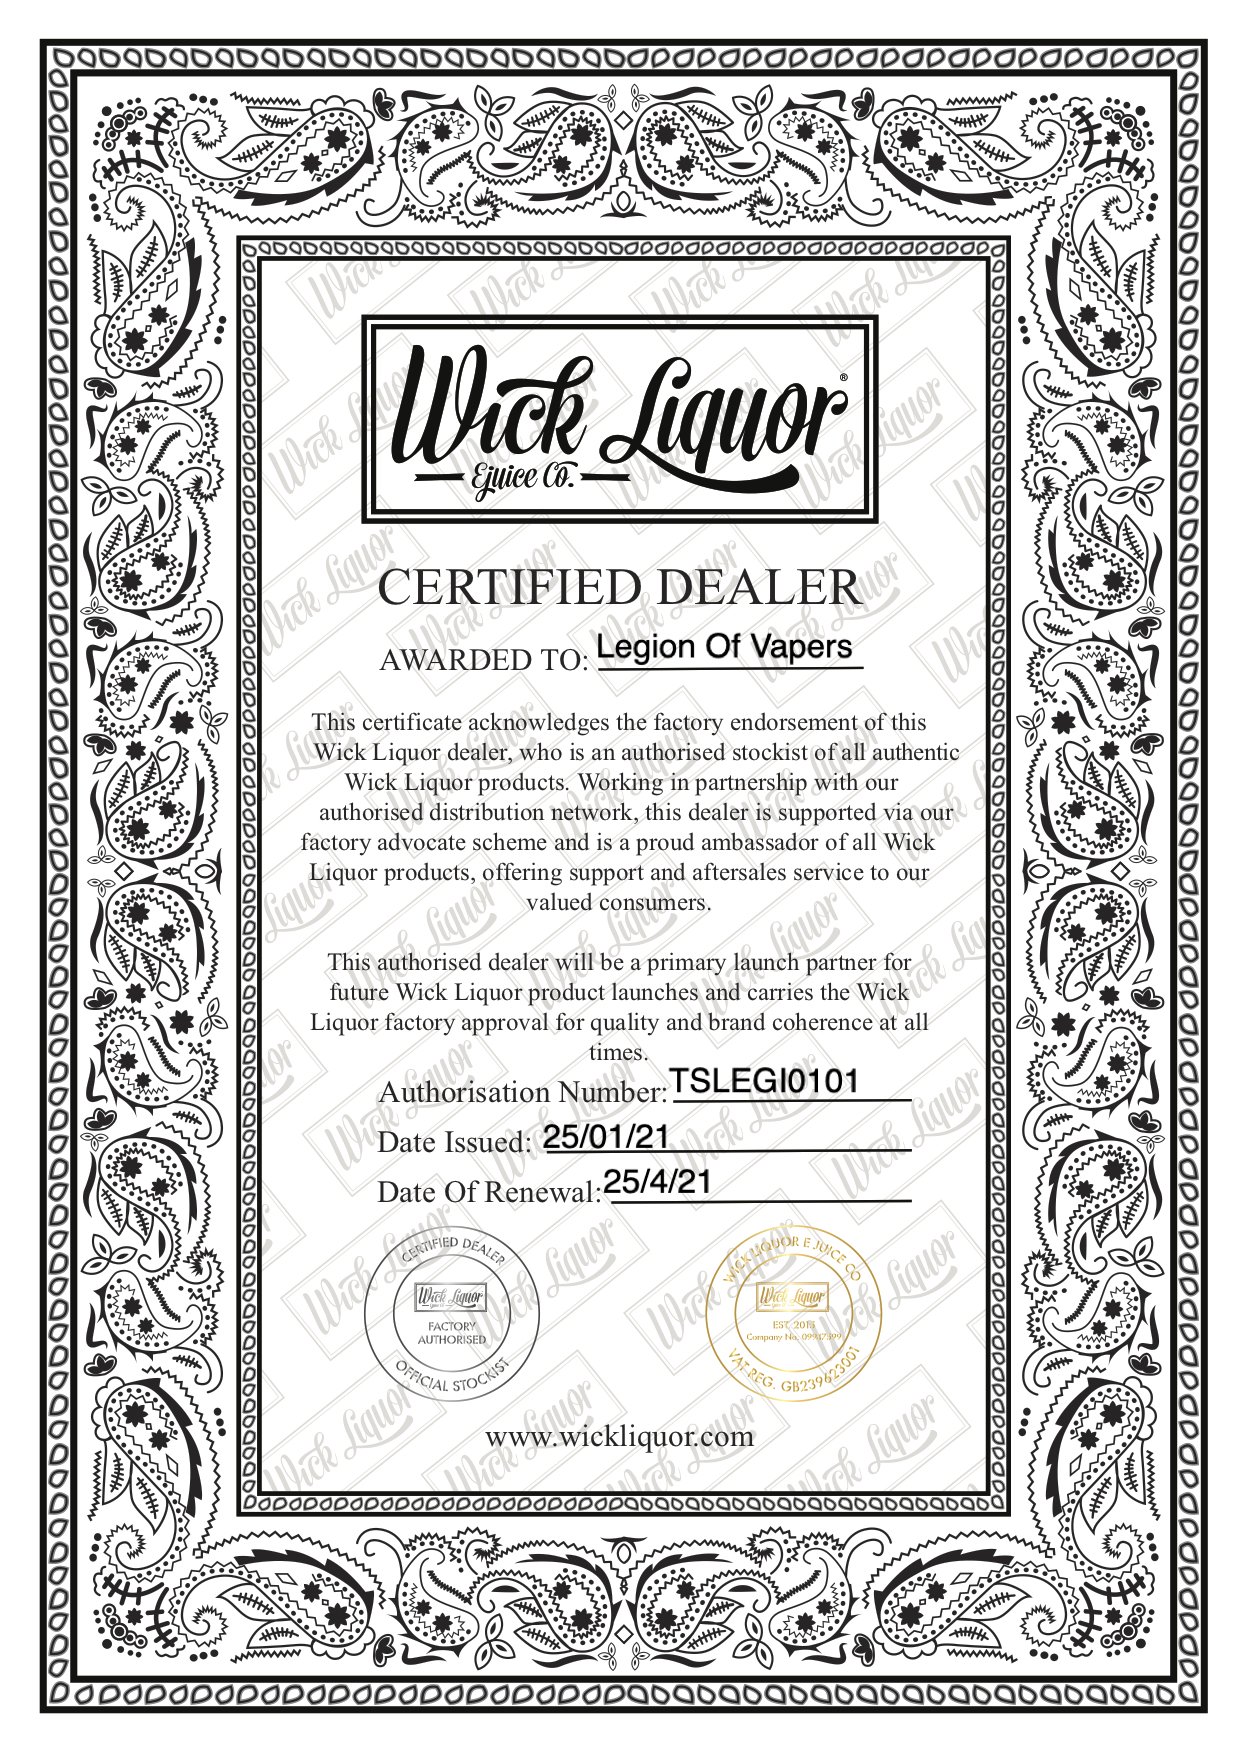 Certificate from Wick Liquor authenticating Legion of Vapers as an authorised dealer of their product.